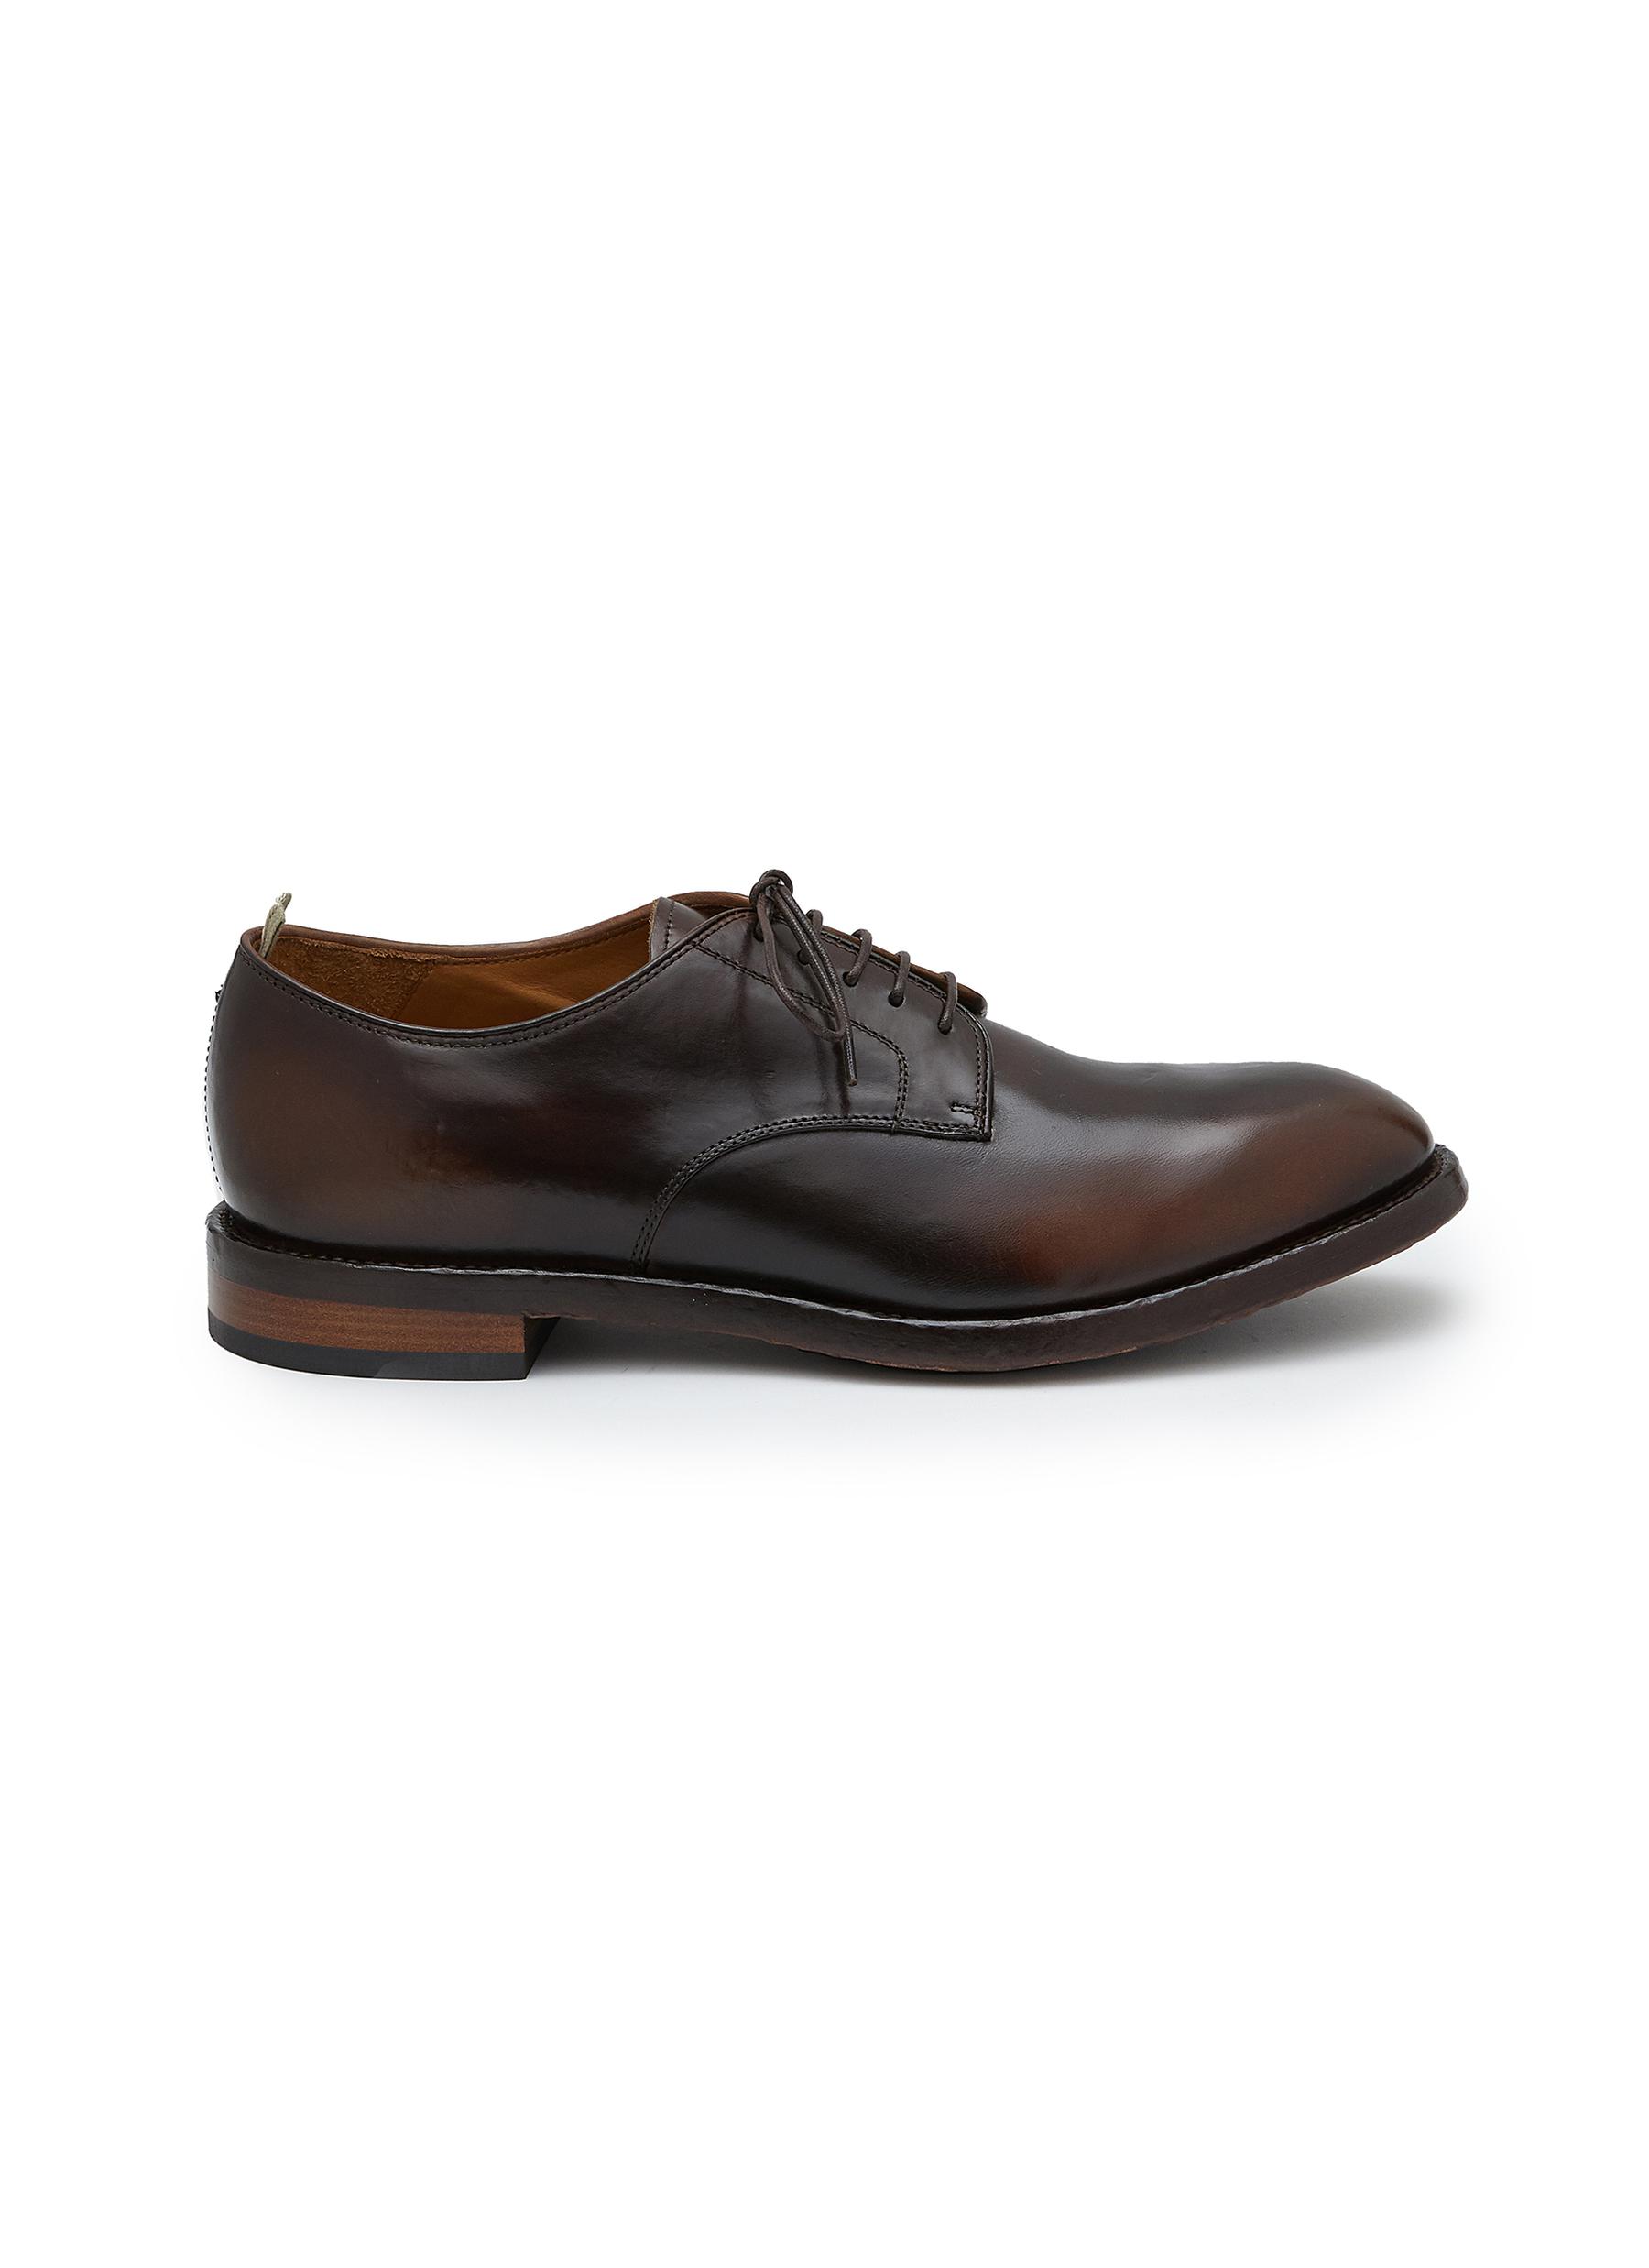 Temple 018 10-Eyelet Leather Derby Shoes